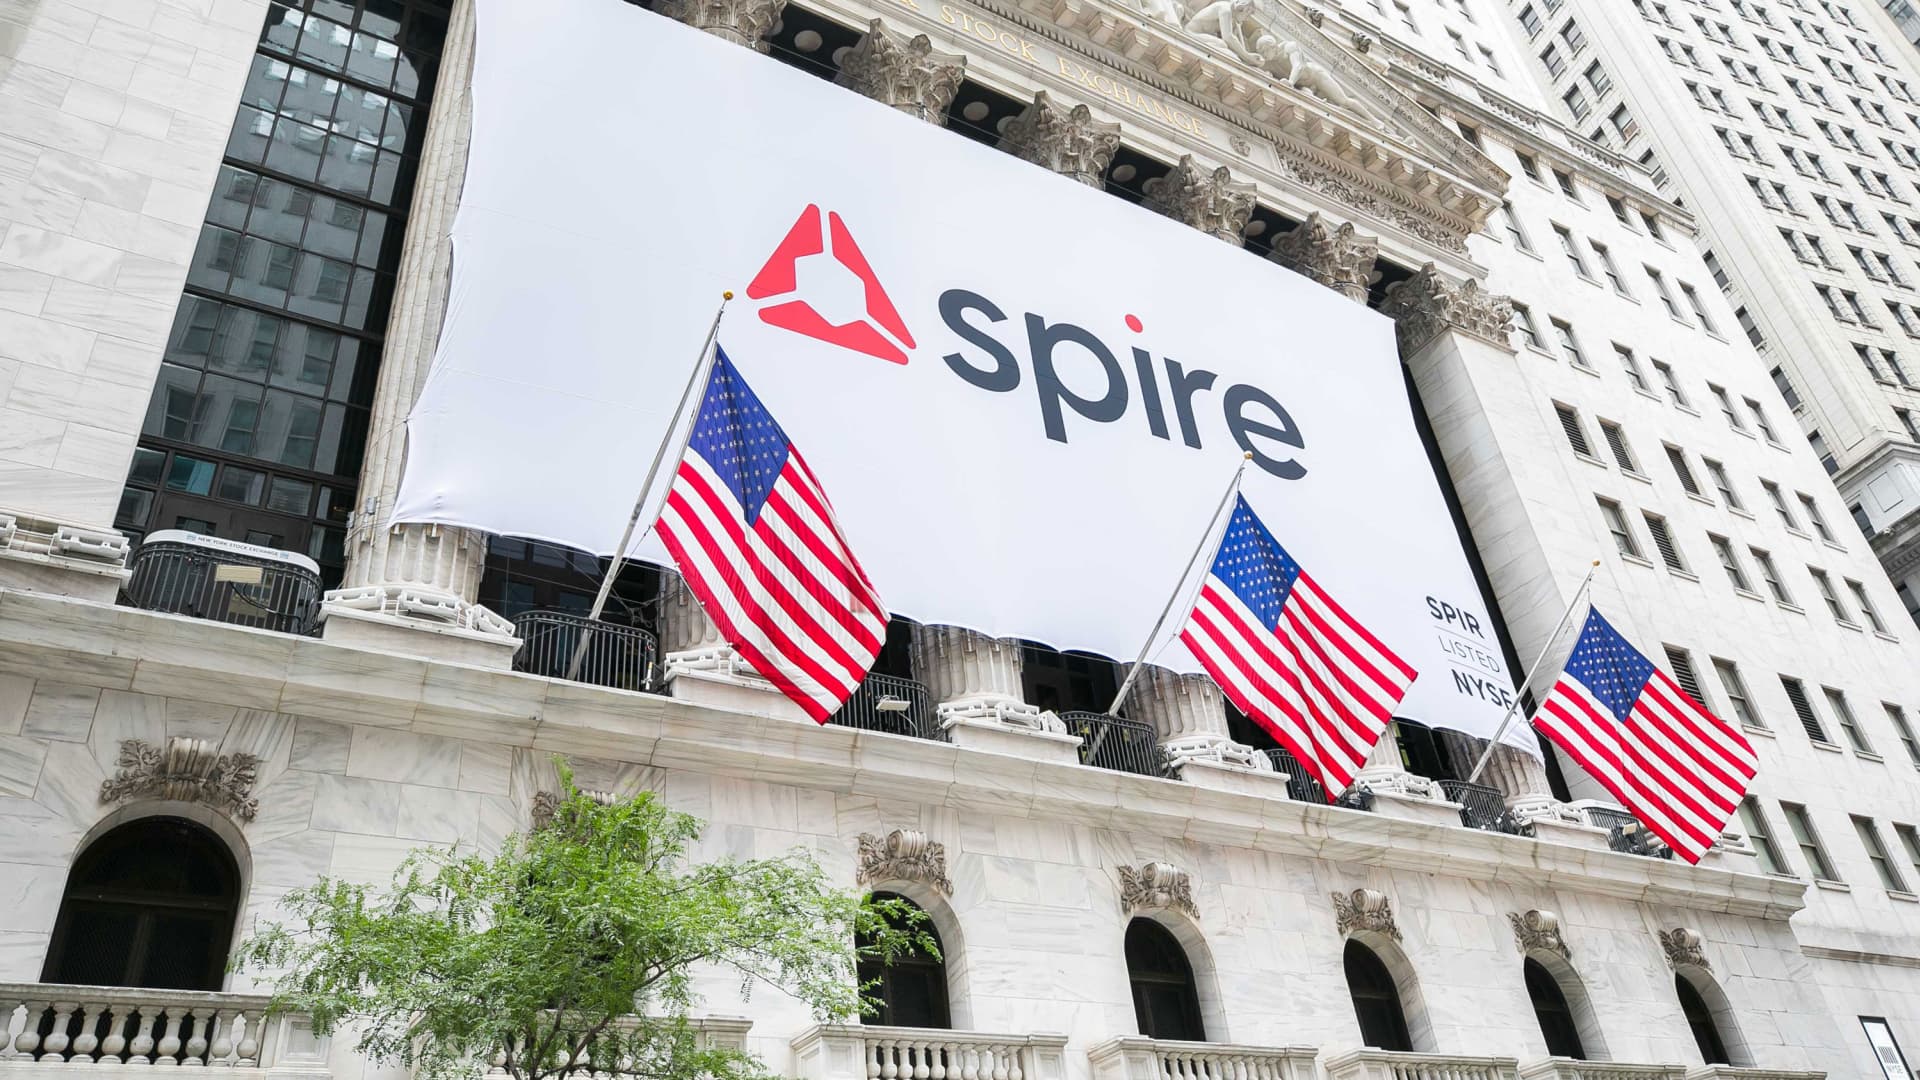 Spire Global at the New York Stock Exchange, August 17, 2021.